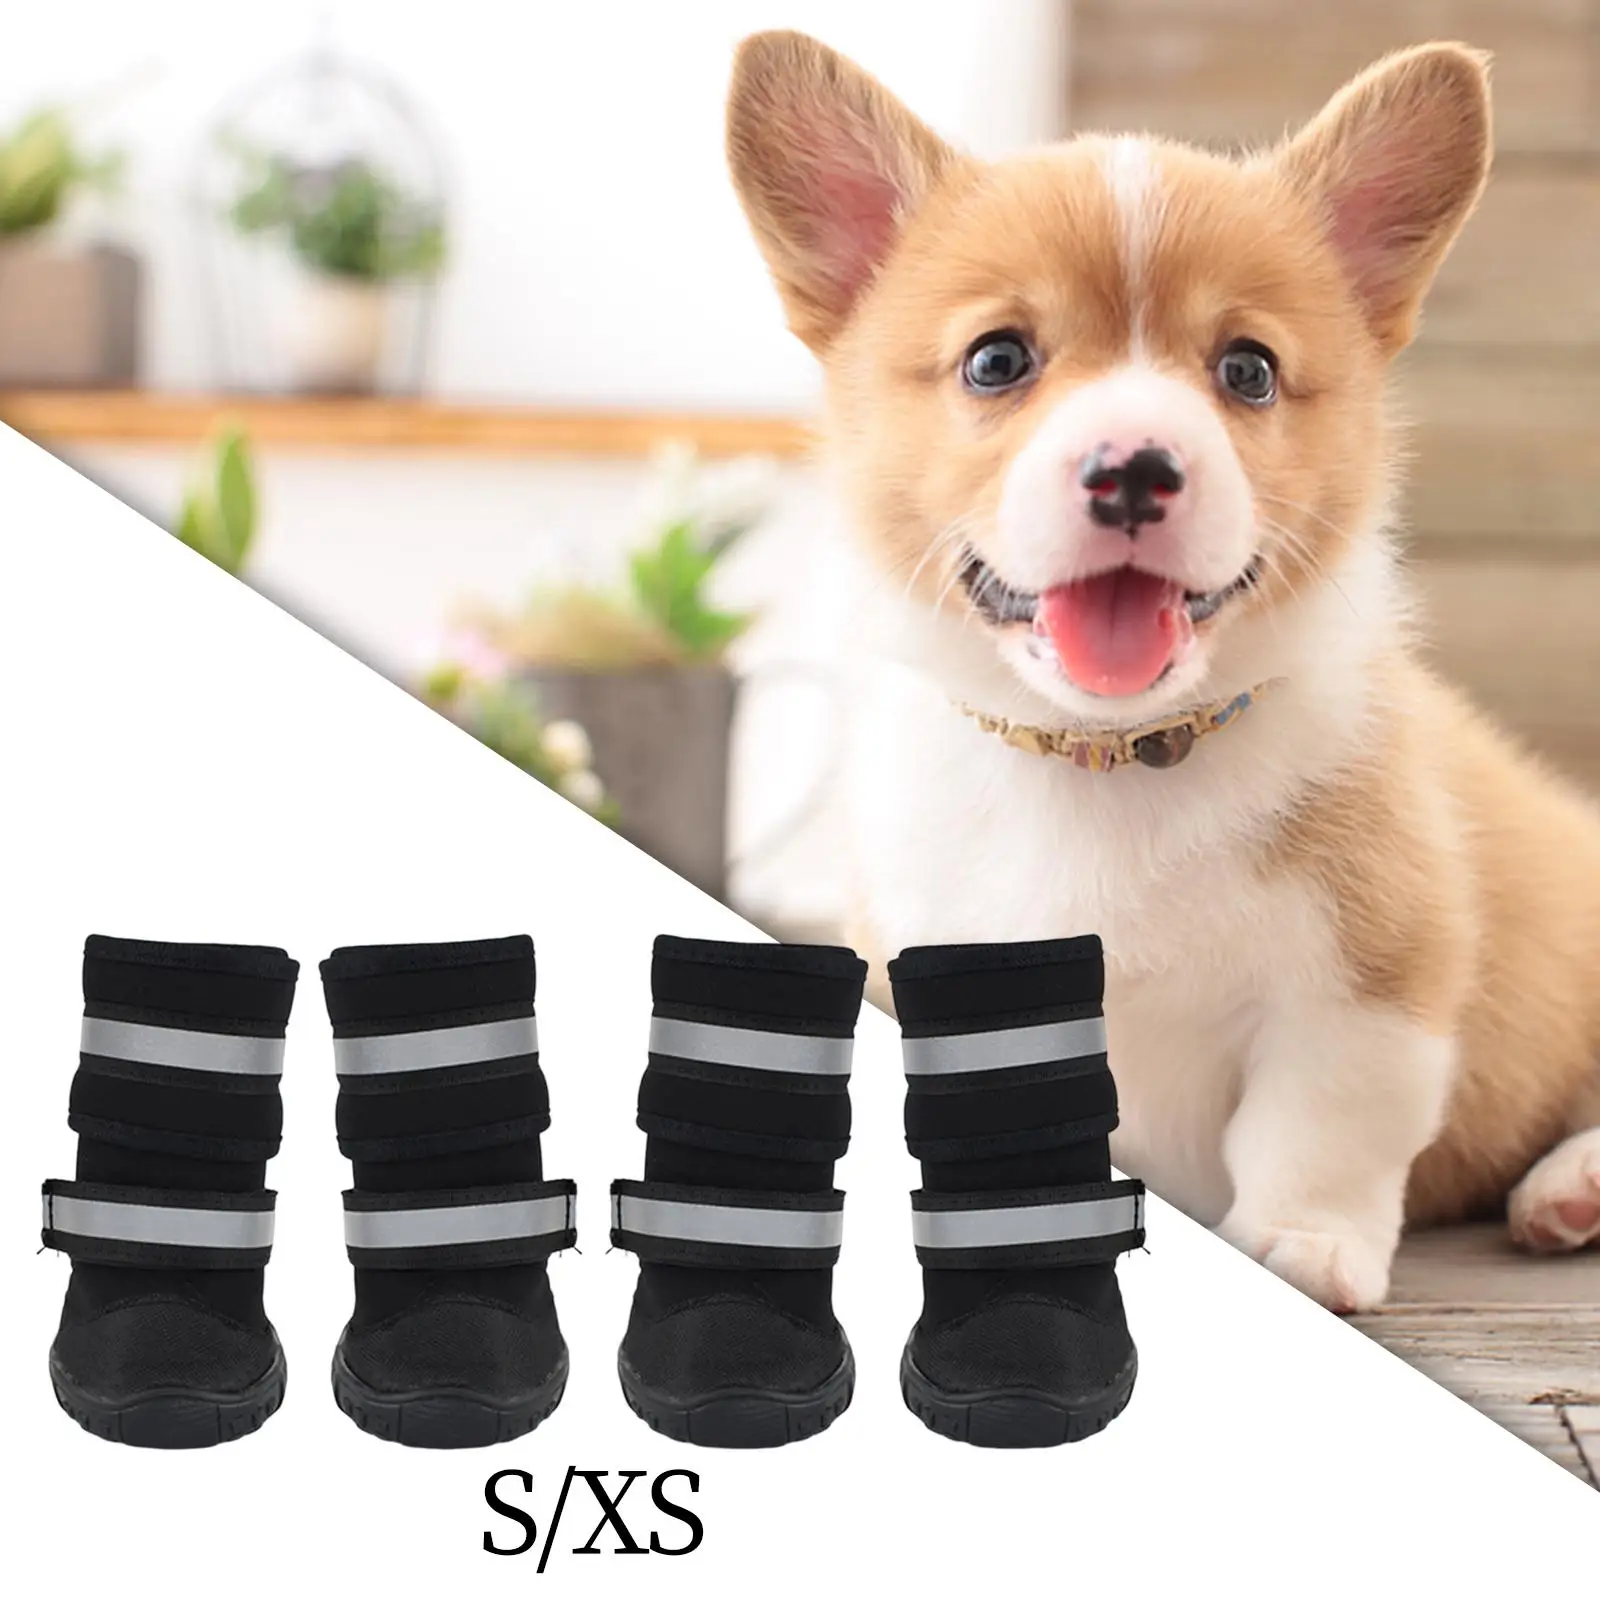 Dog Boots Adjustable Straps Fleece Lining Dog Shoes for Hiking Hot Pavement